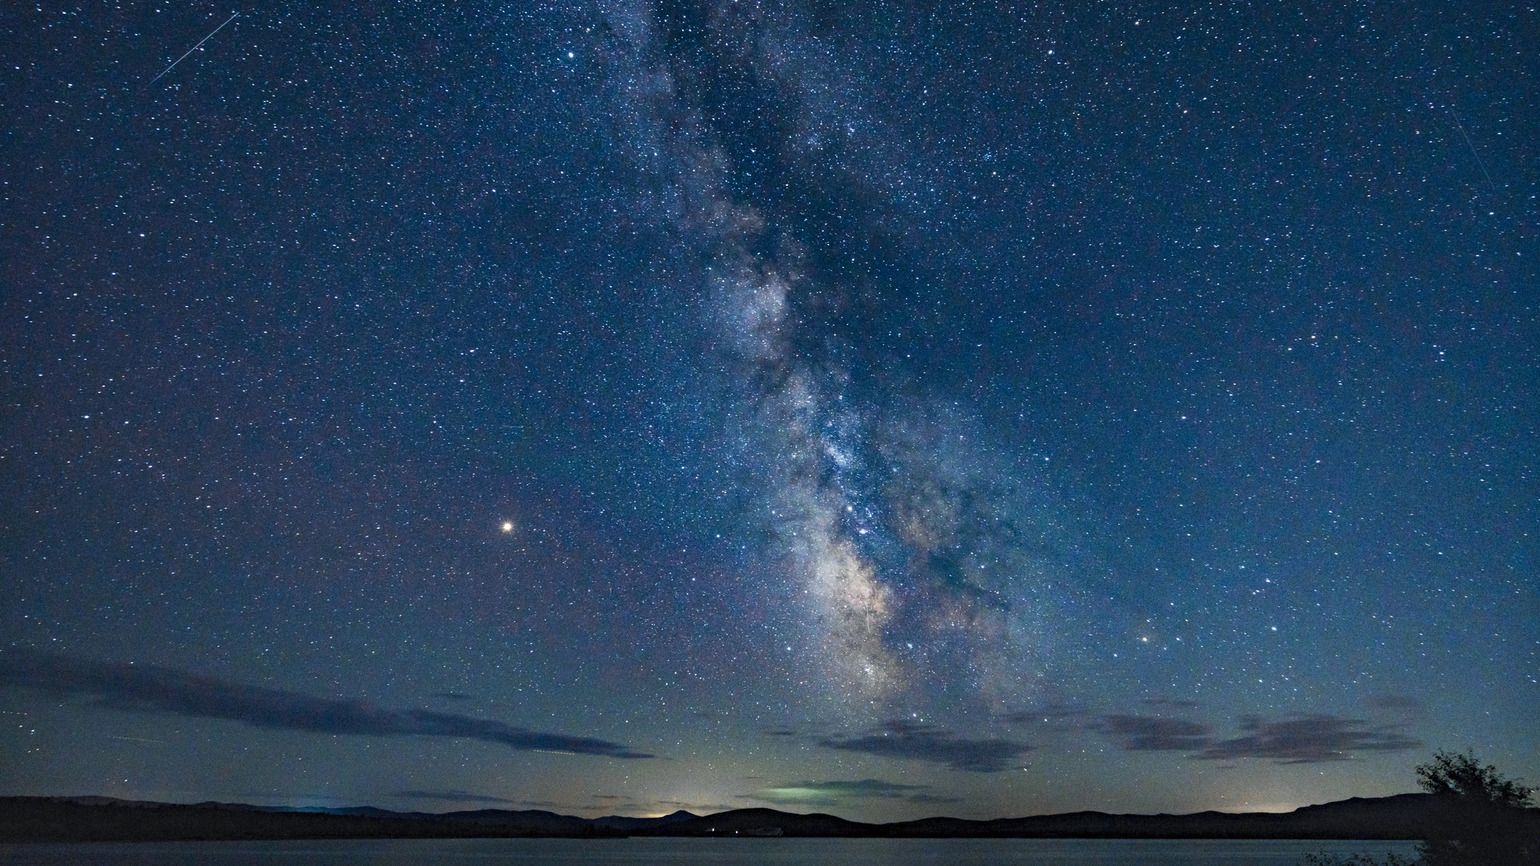 The Milky Way in the night sky shows the work of God's hands